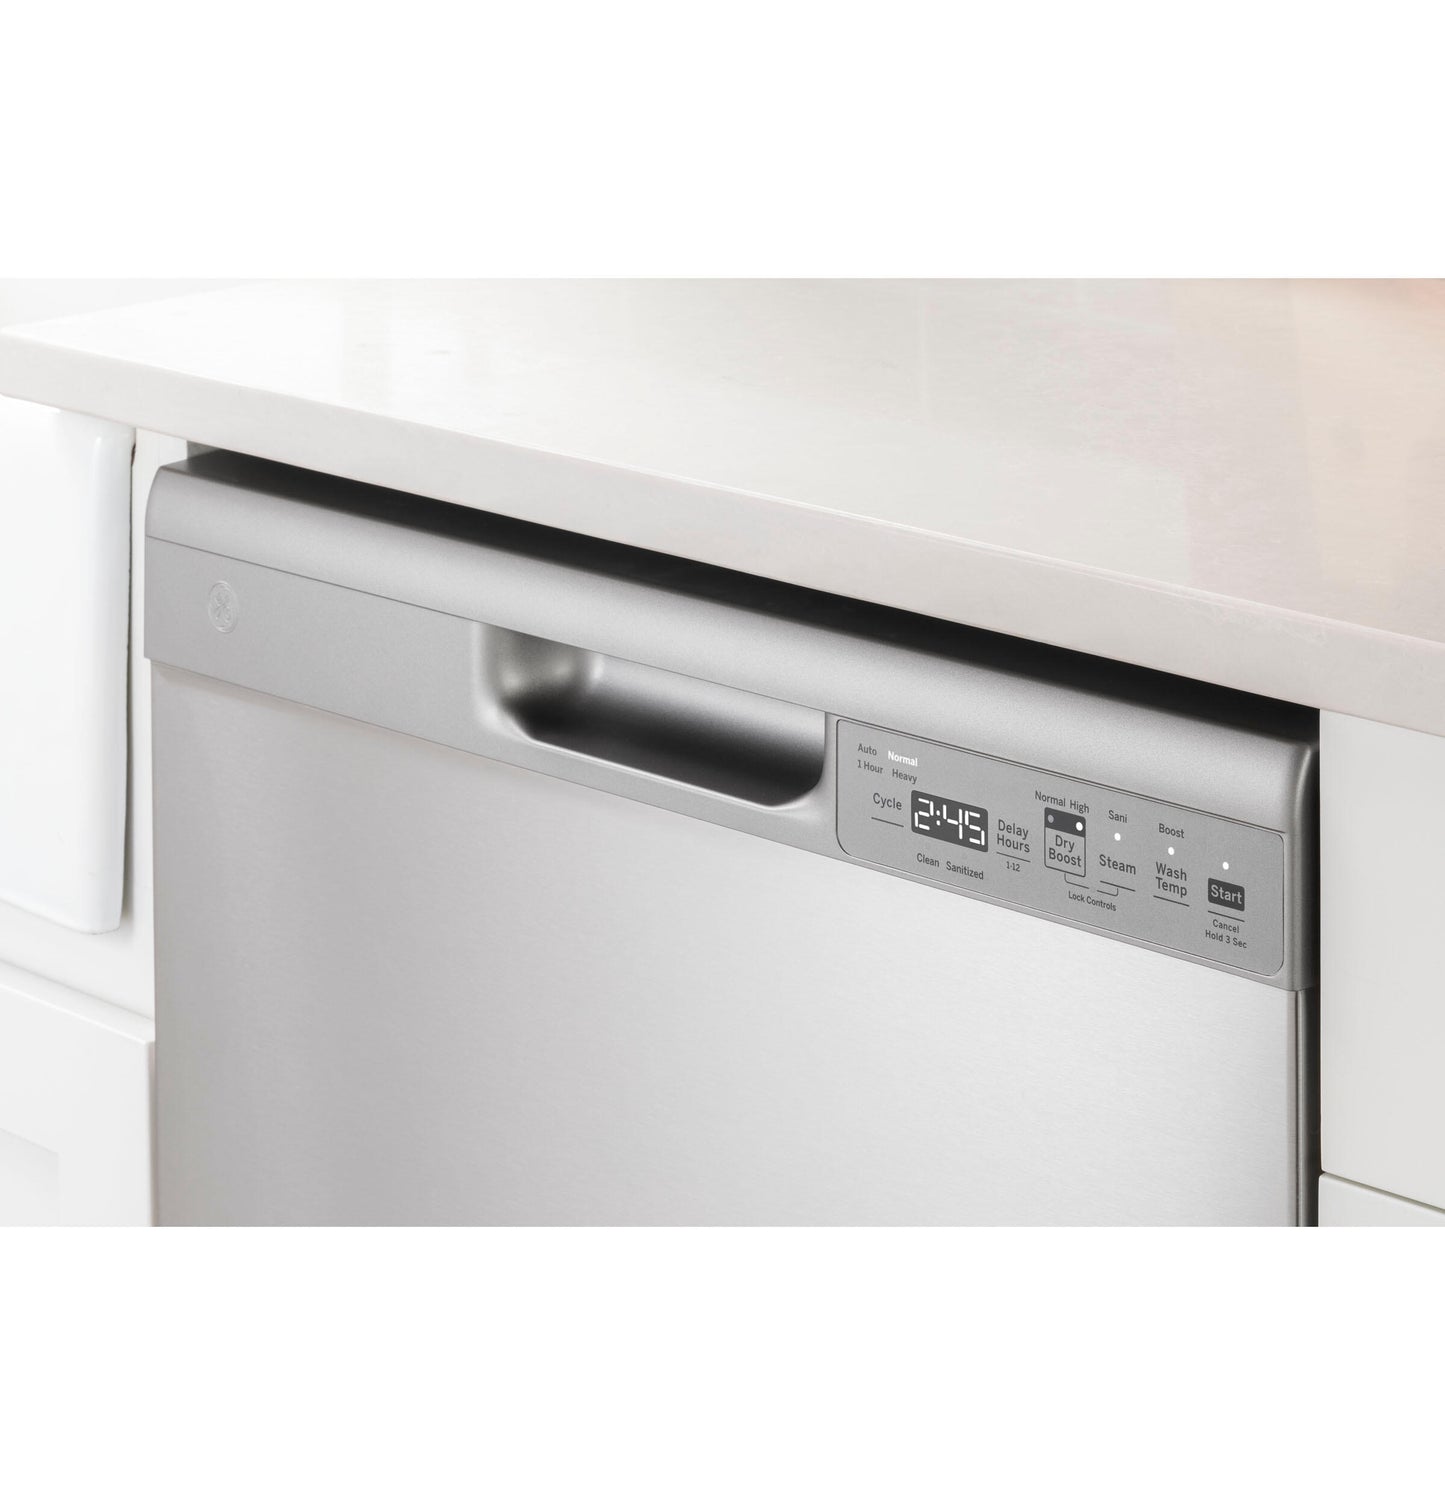 Ge Appliances GDF550PGRBB Ge® Front Control With Plastic Interior Dishwasher With Sanitize Cycle & Dry Boost